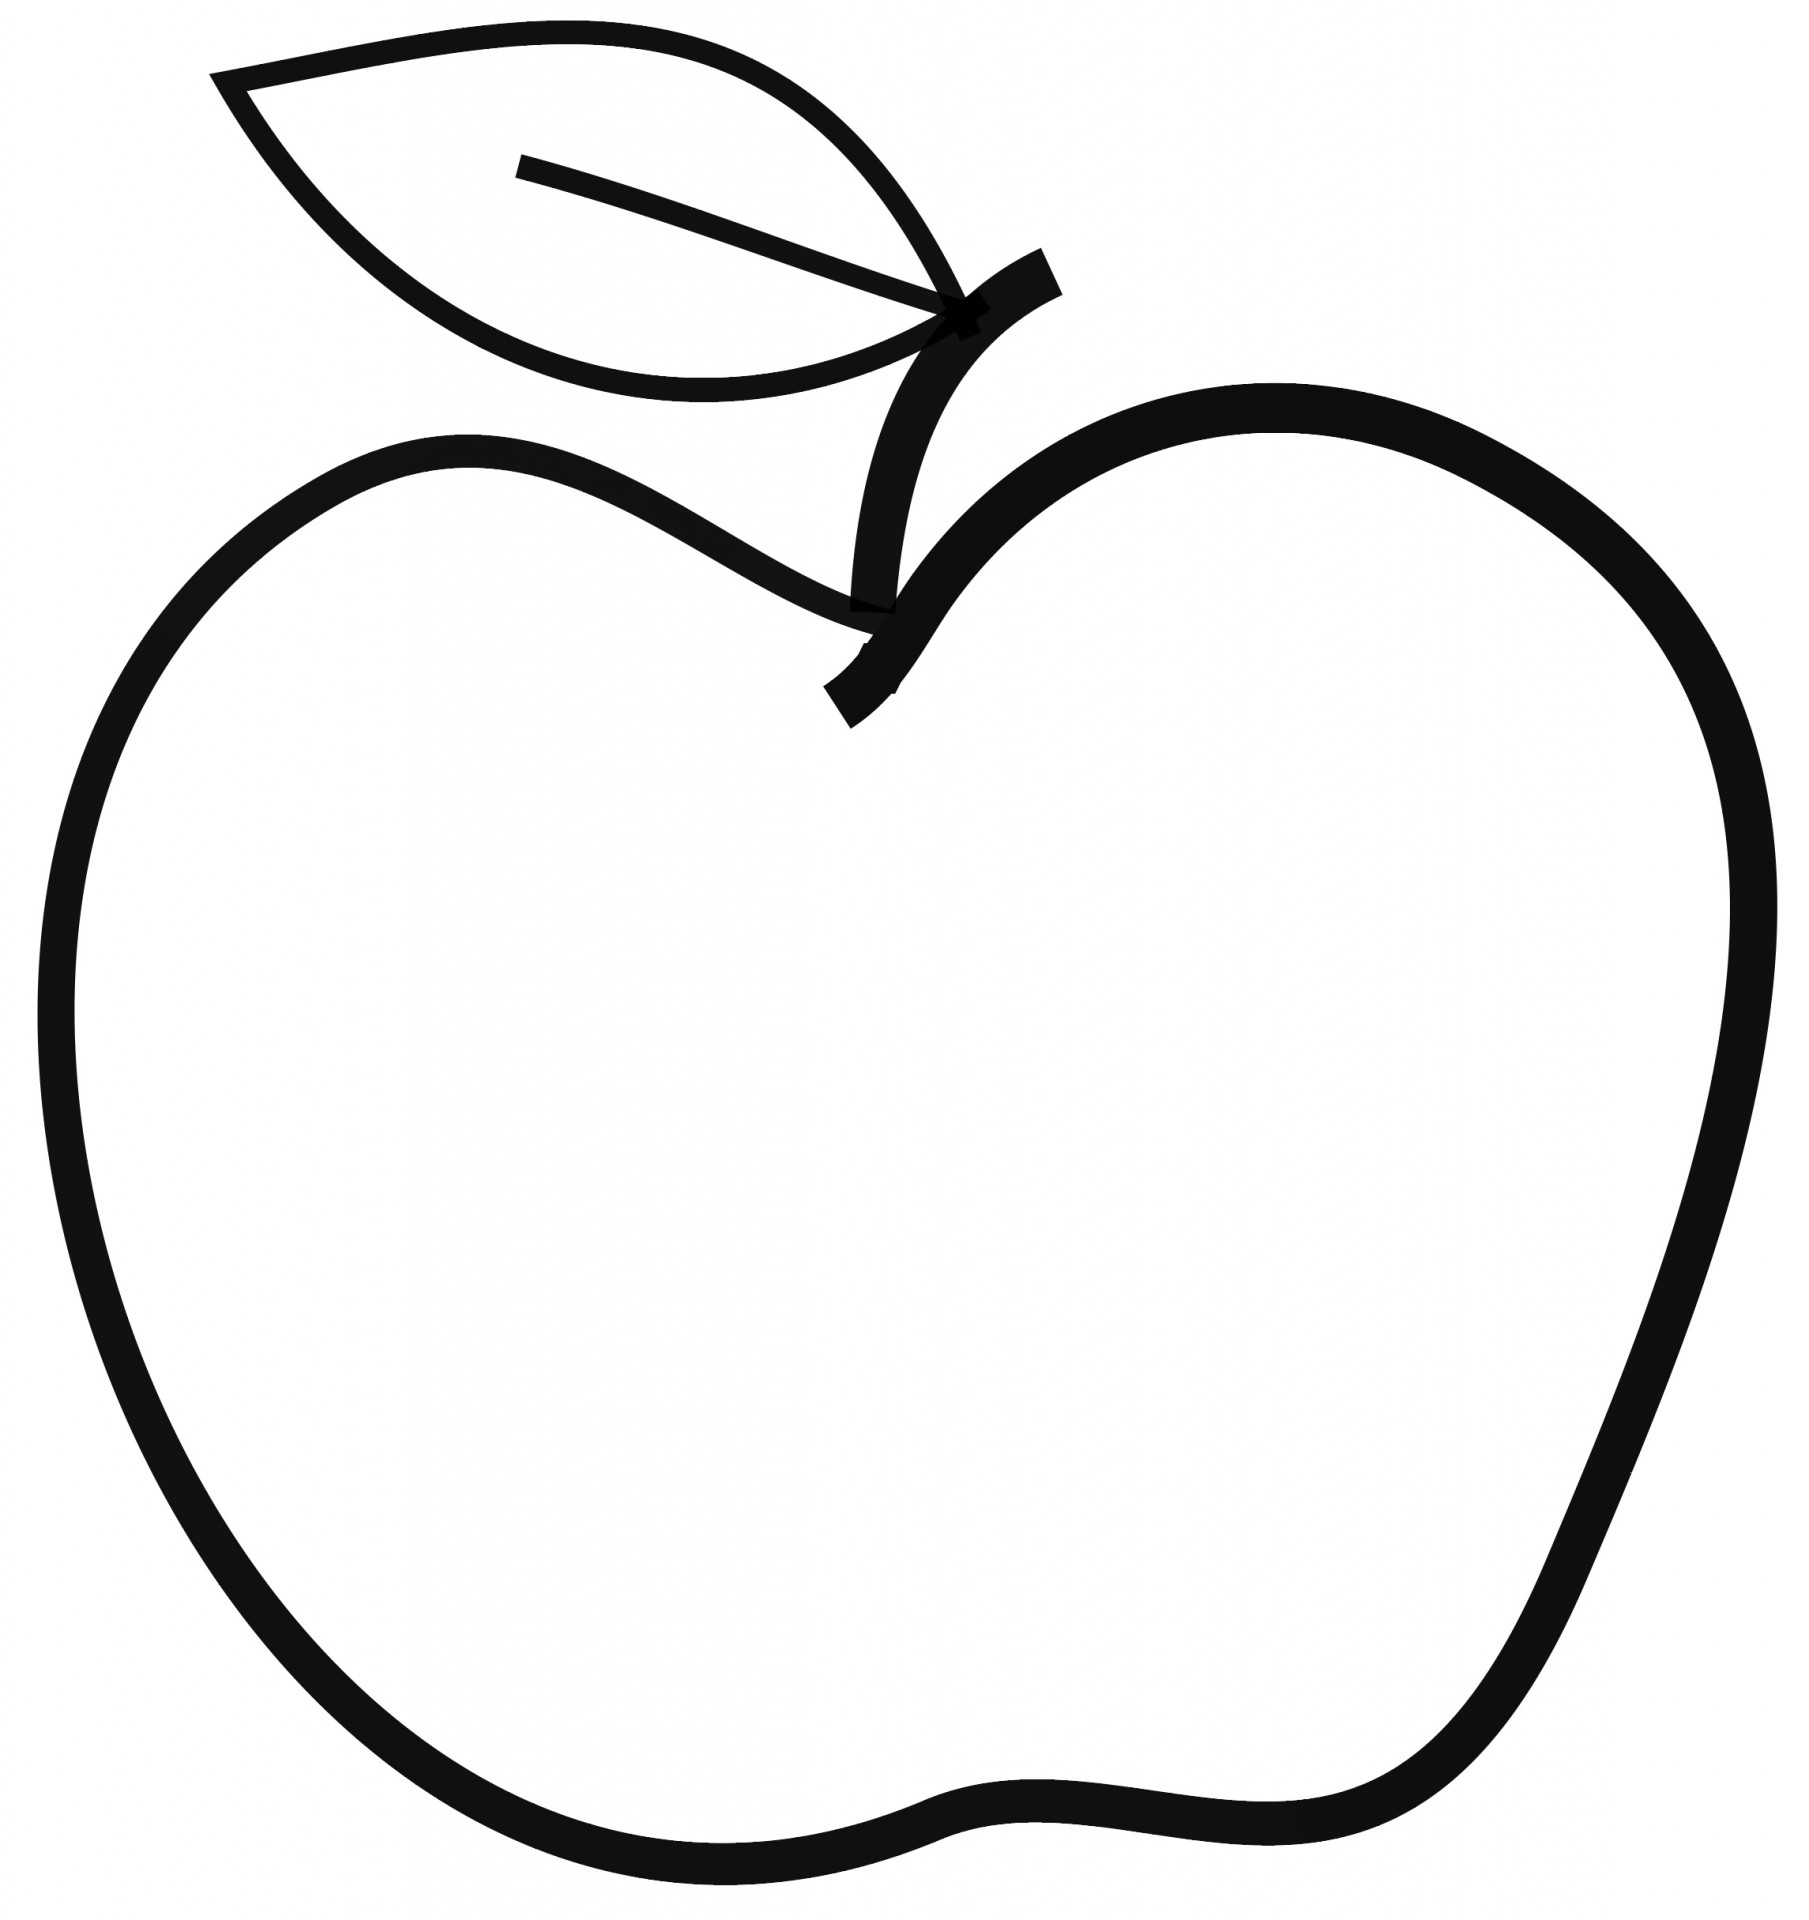 Apple clip art free pictures